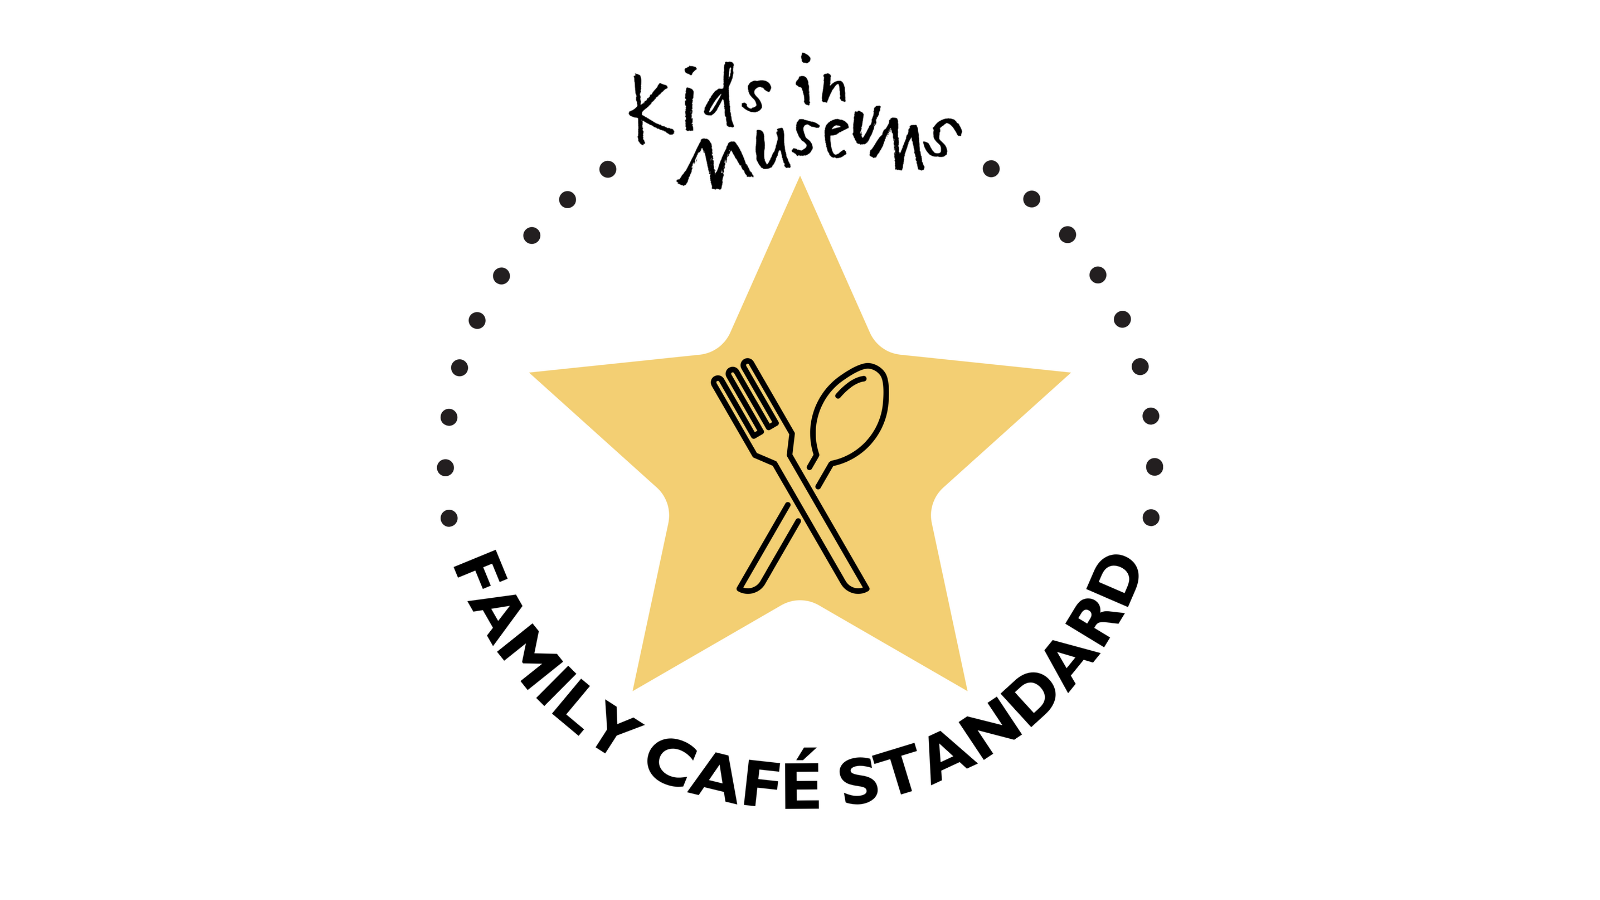 The Family Café Standard circular logo. comprising of a yellow star containing a crossed fork and spoon with text surrounding the design reading Kids in Museums Family Café Standard.